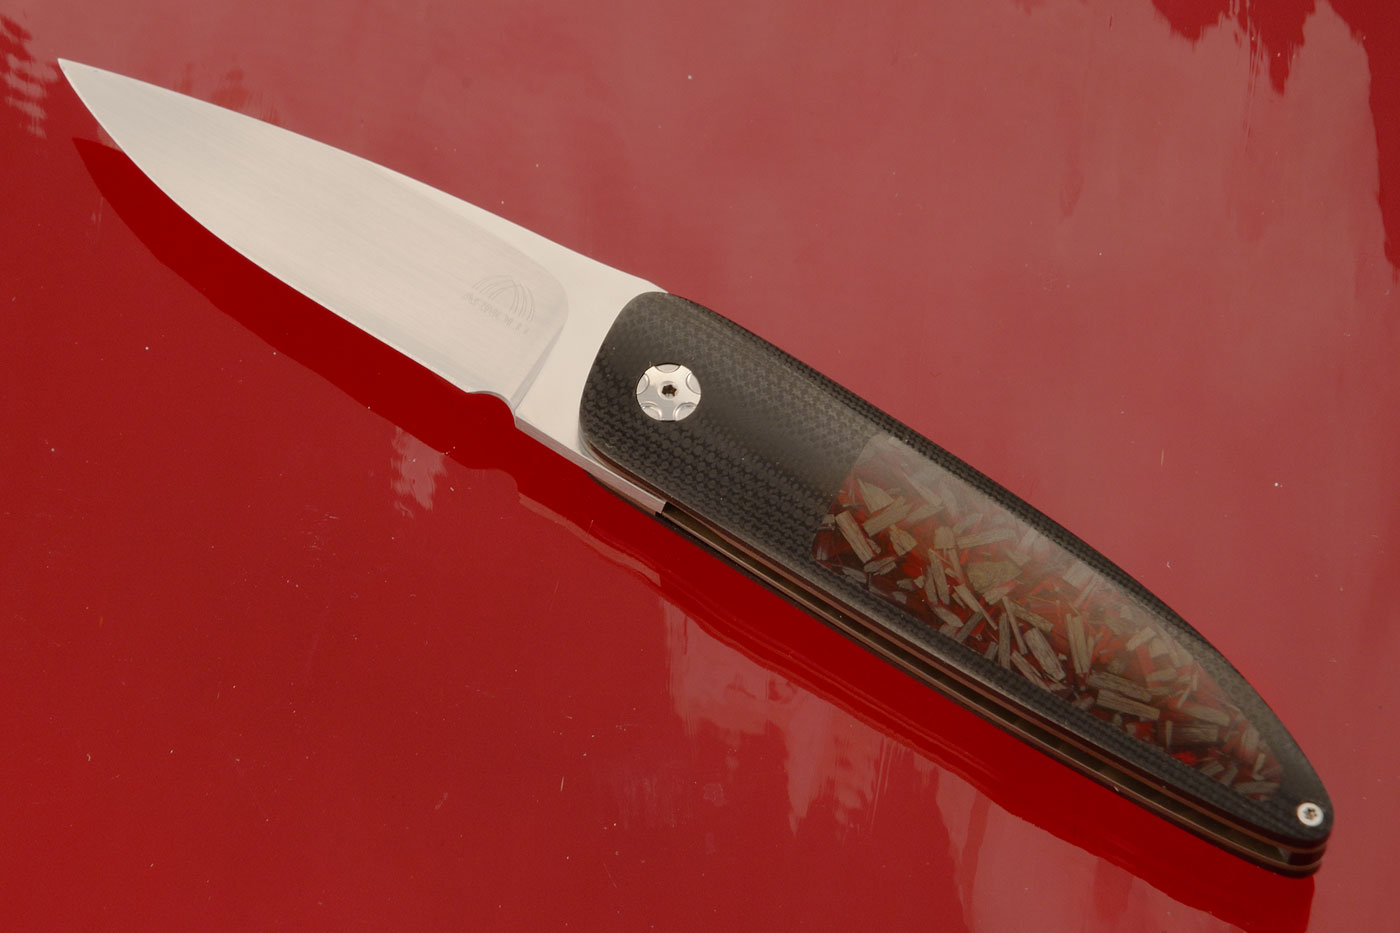 Oyster Front Flipper with Black G10 and Red Shred Carbon Fiber